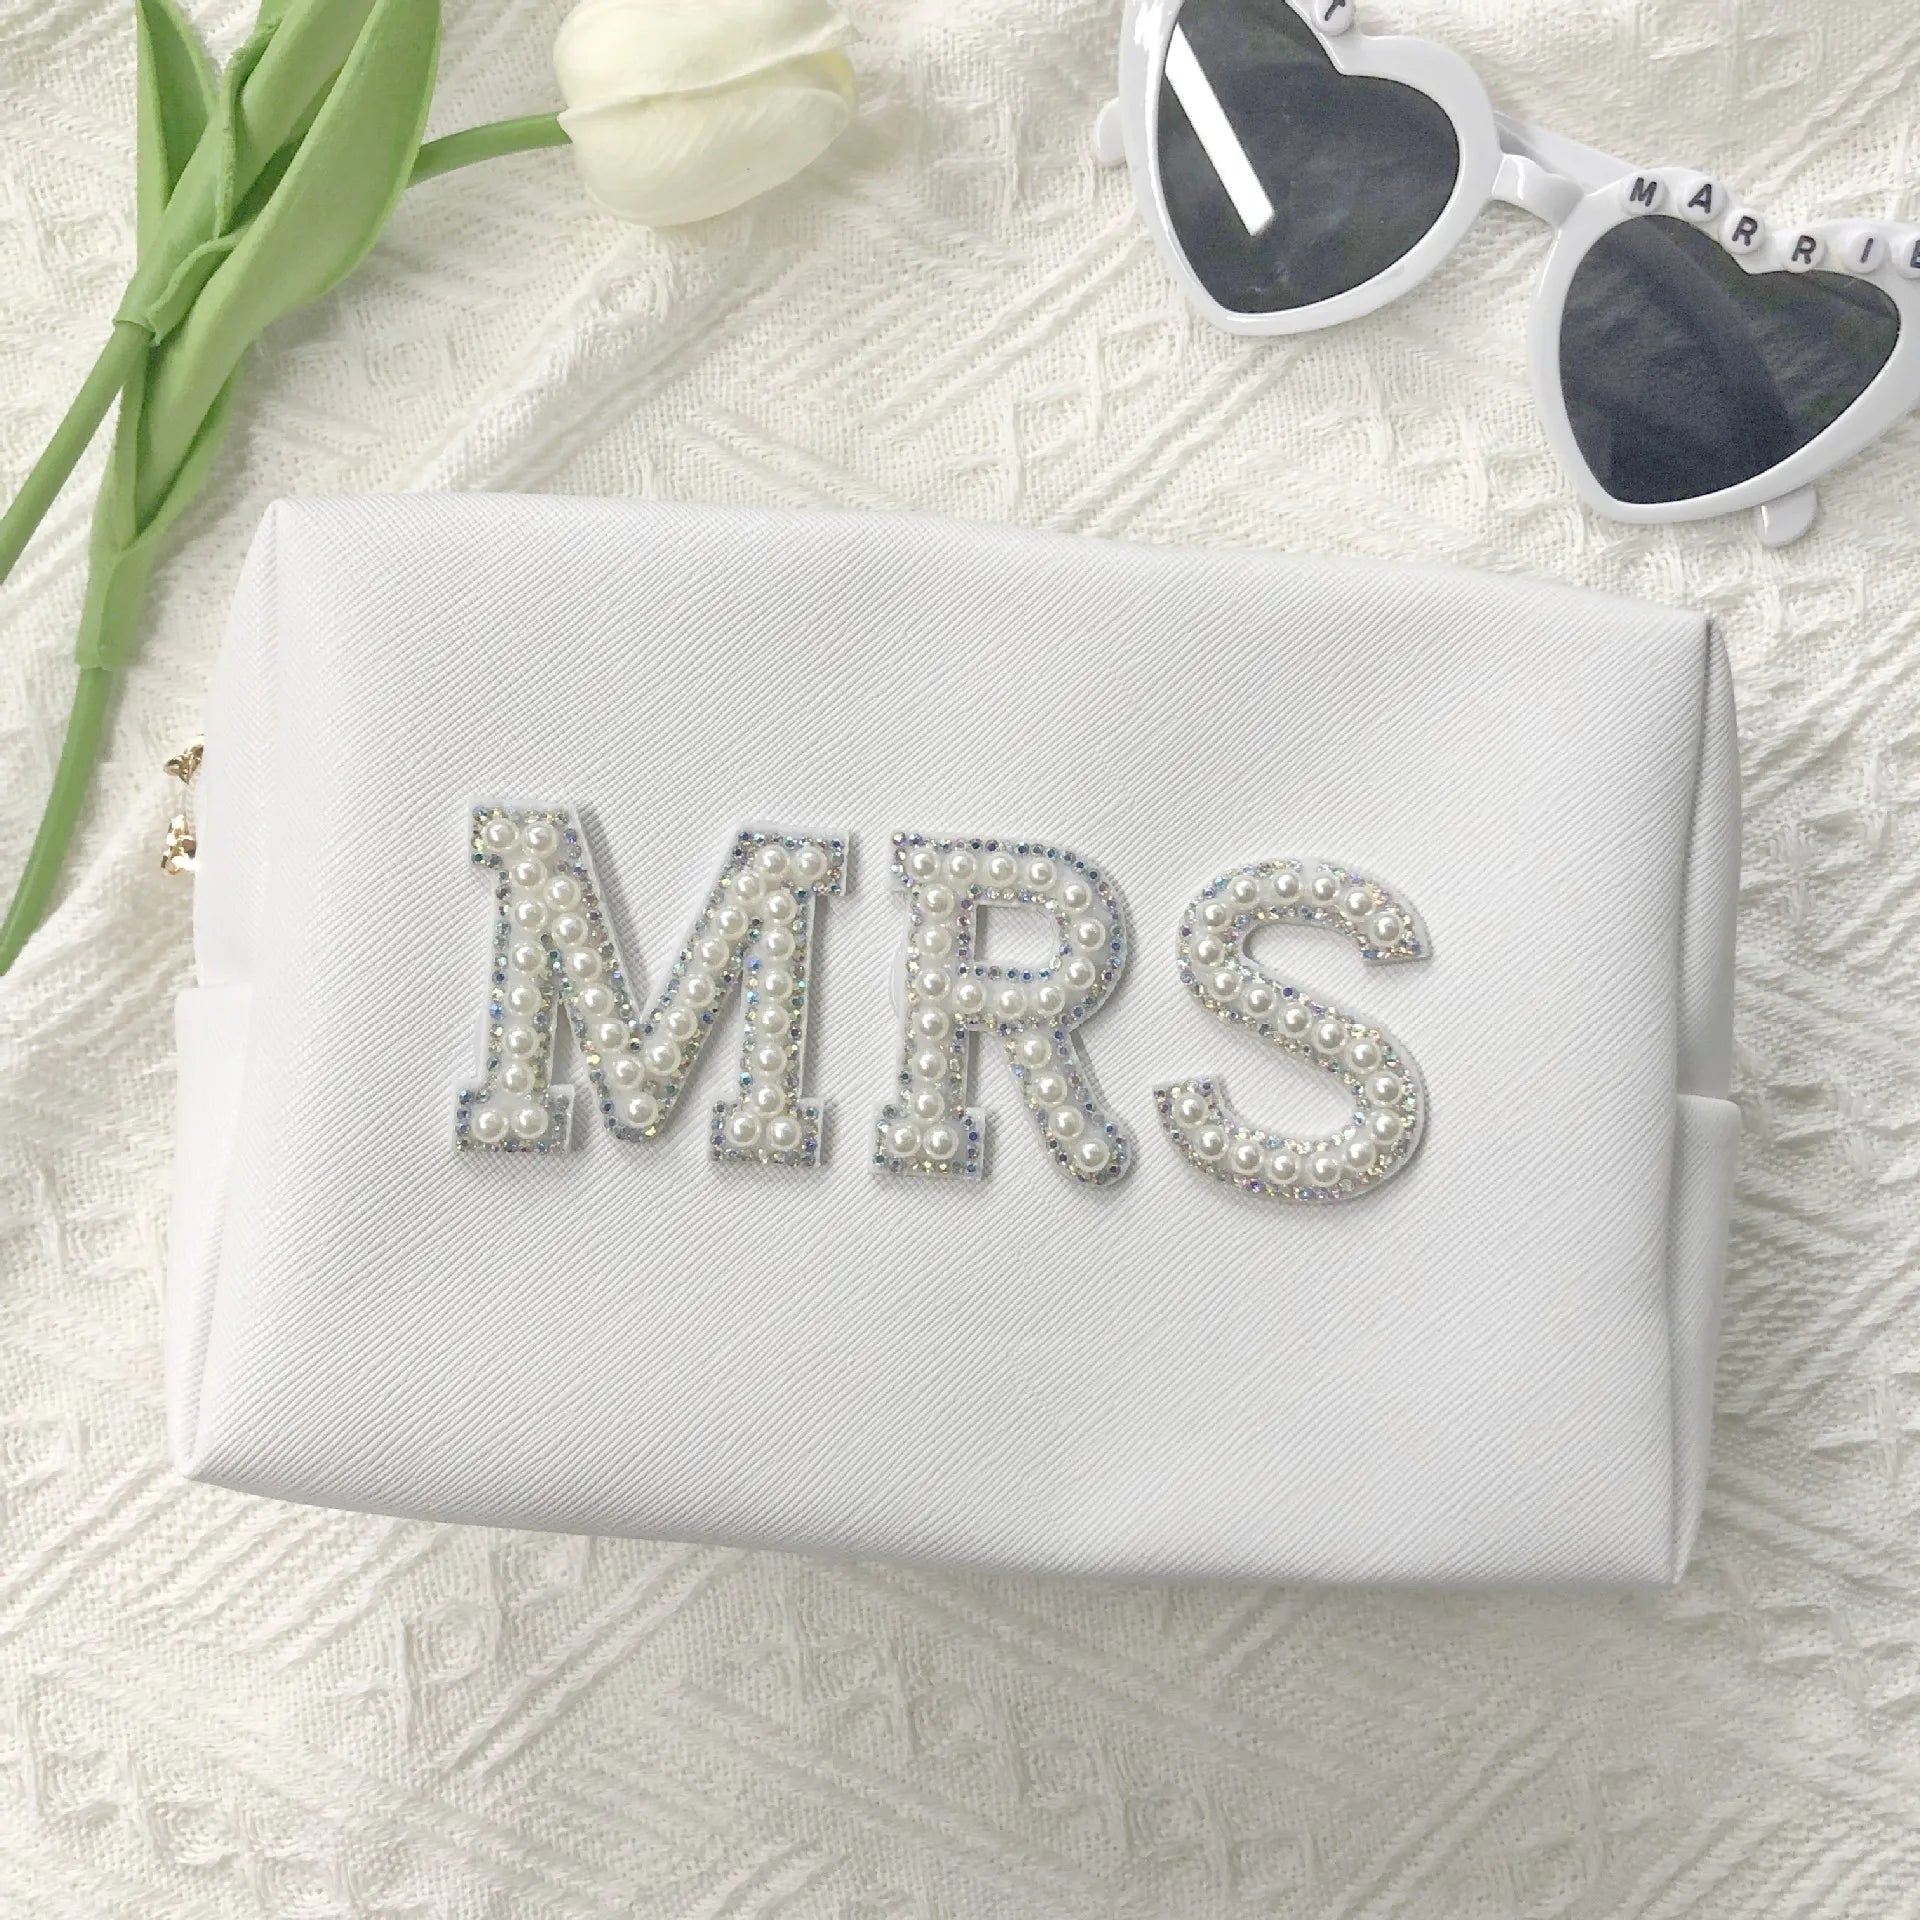 Bride/Mrs Pearl Makeup Travel Bag Travel Wedding Cosmetics Storage Bag - M.Y.A.A.'S Bridal Party Collection